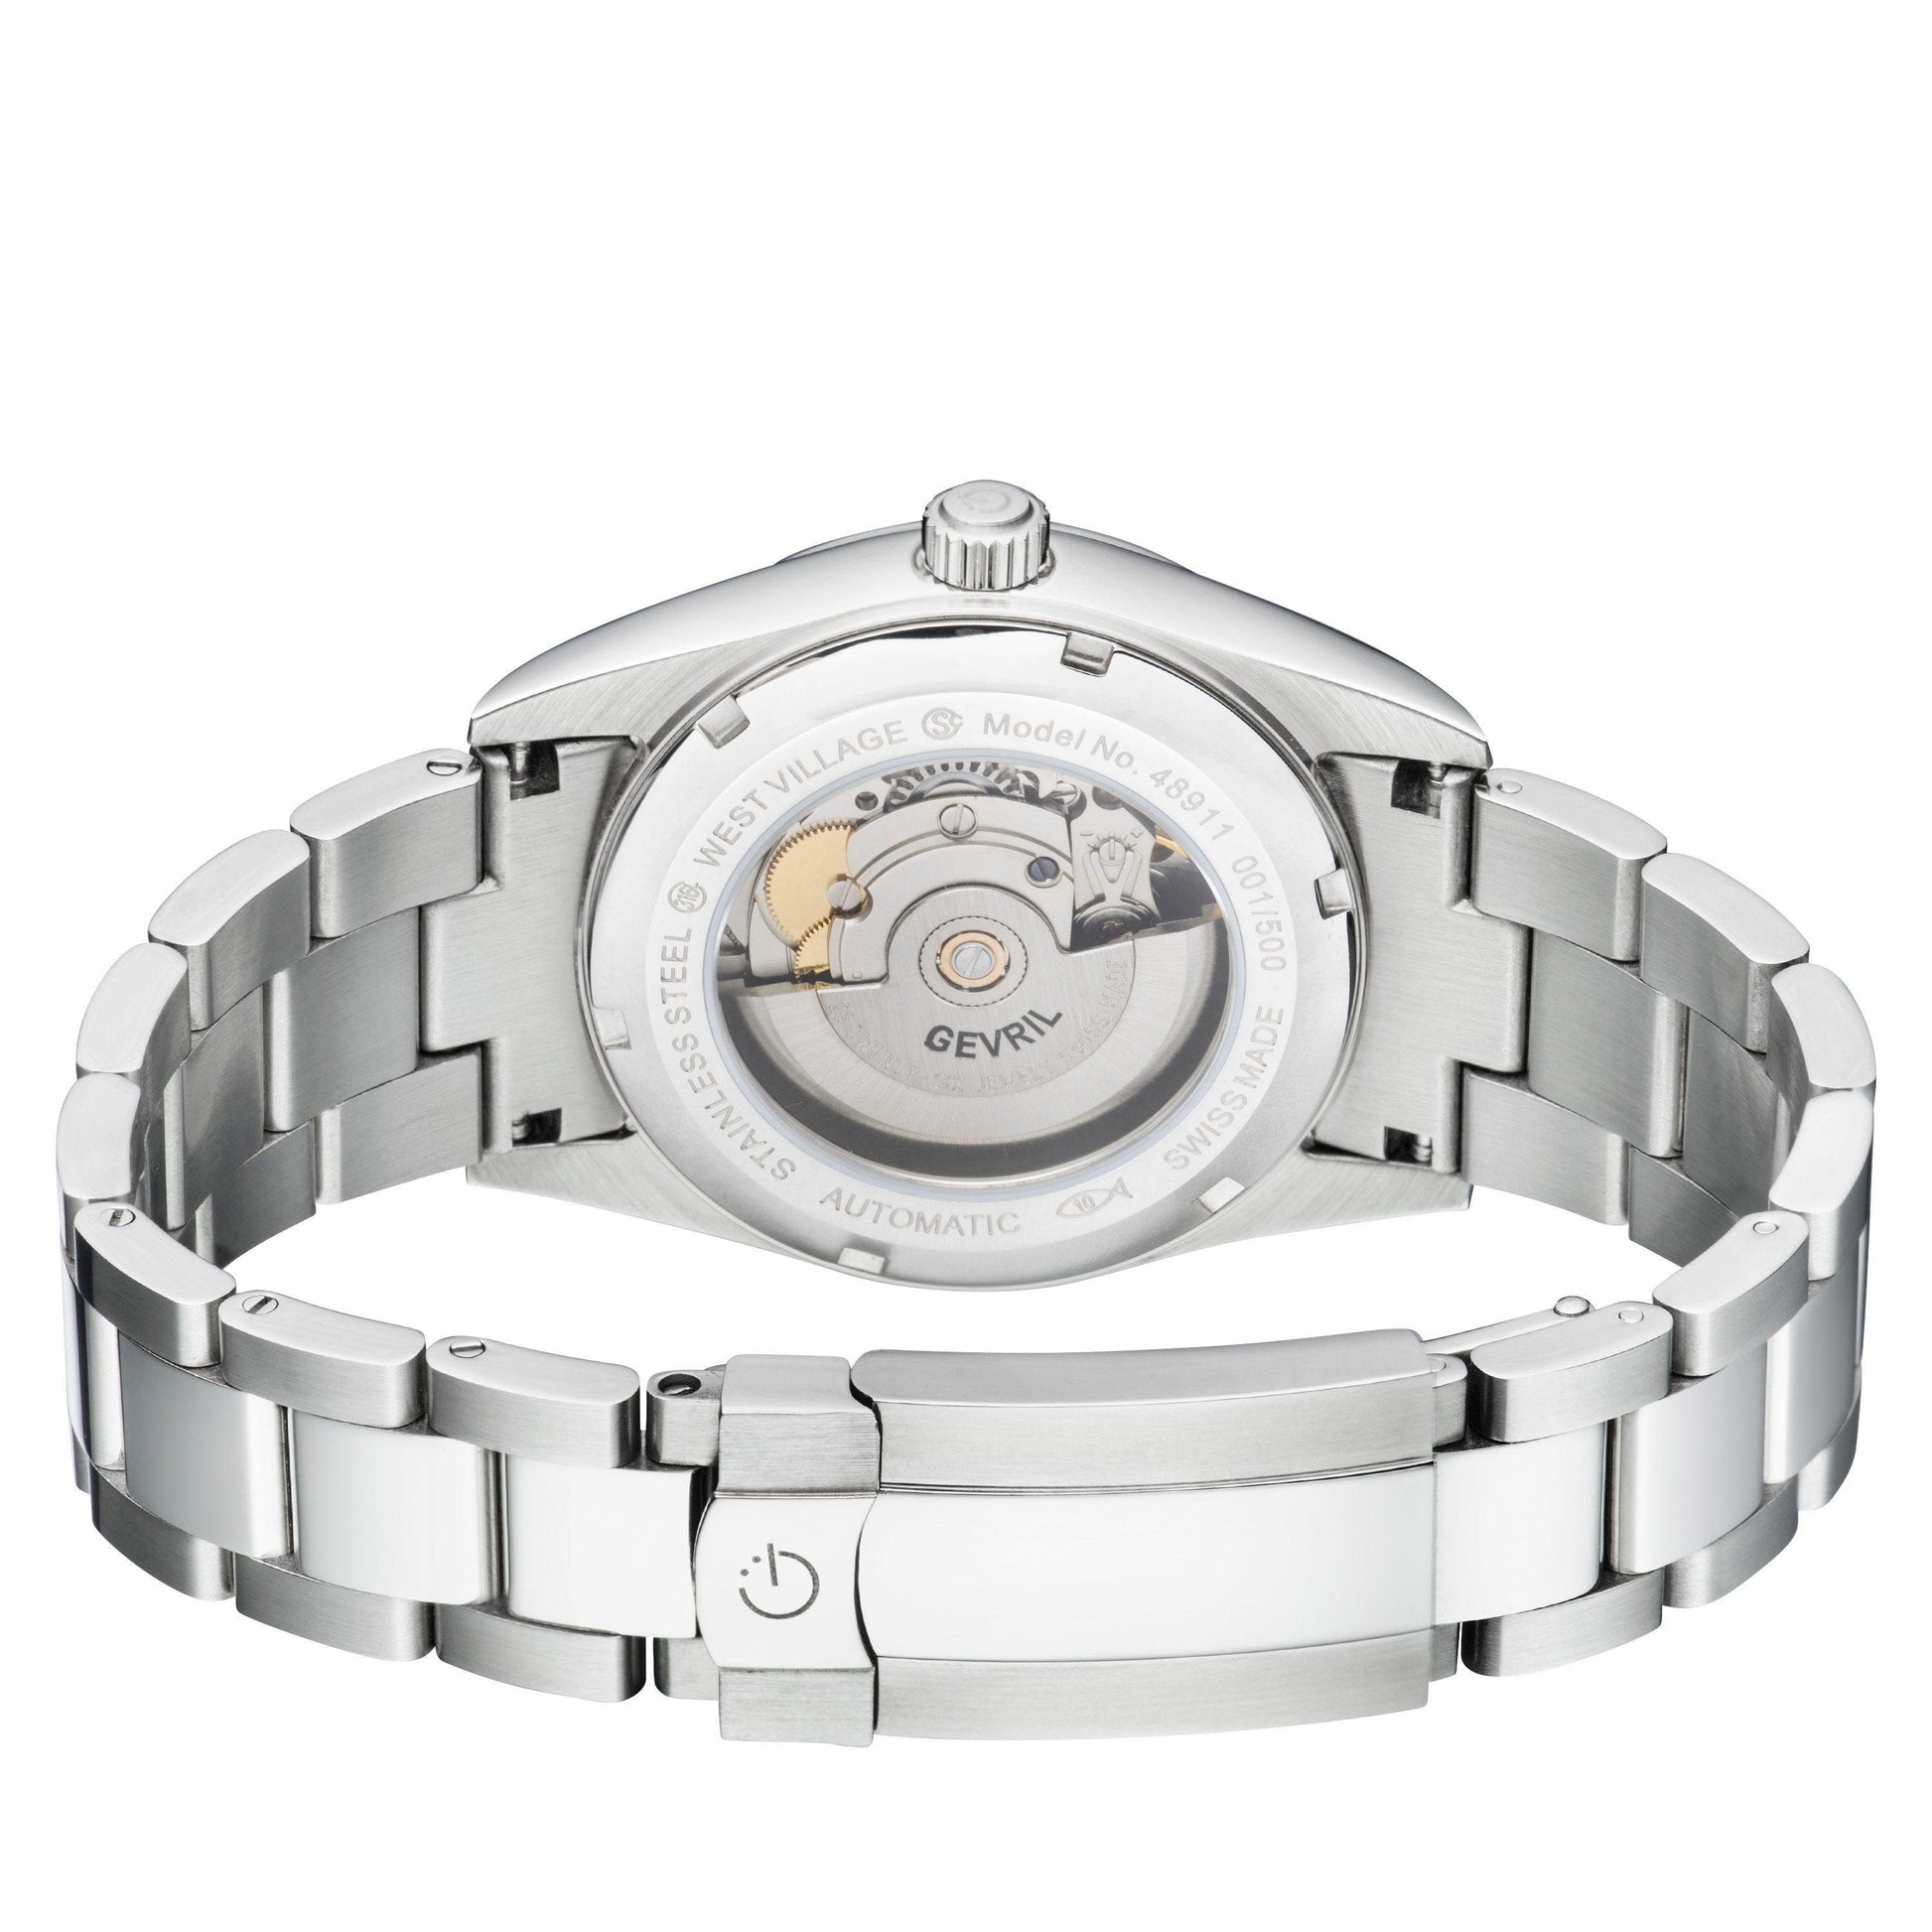 Gevril-Luxury-Swiss-Watches-Gevril West Village - Automatic-48911